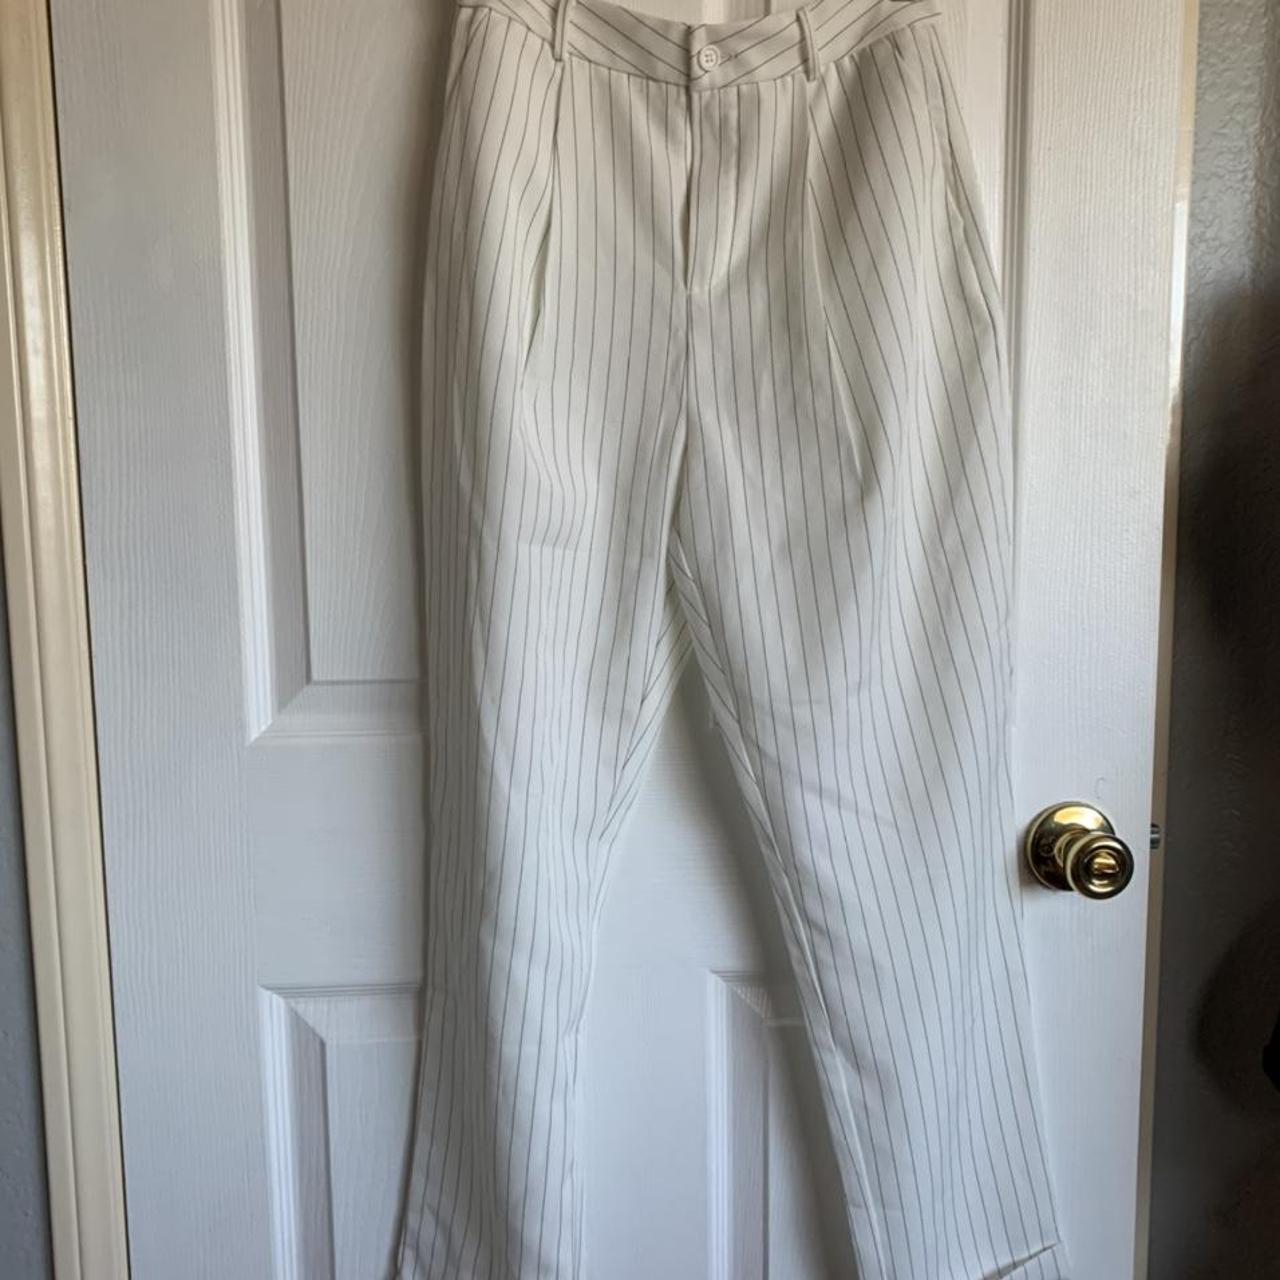 New Forever 21 striped black and white pants. No... - Depop